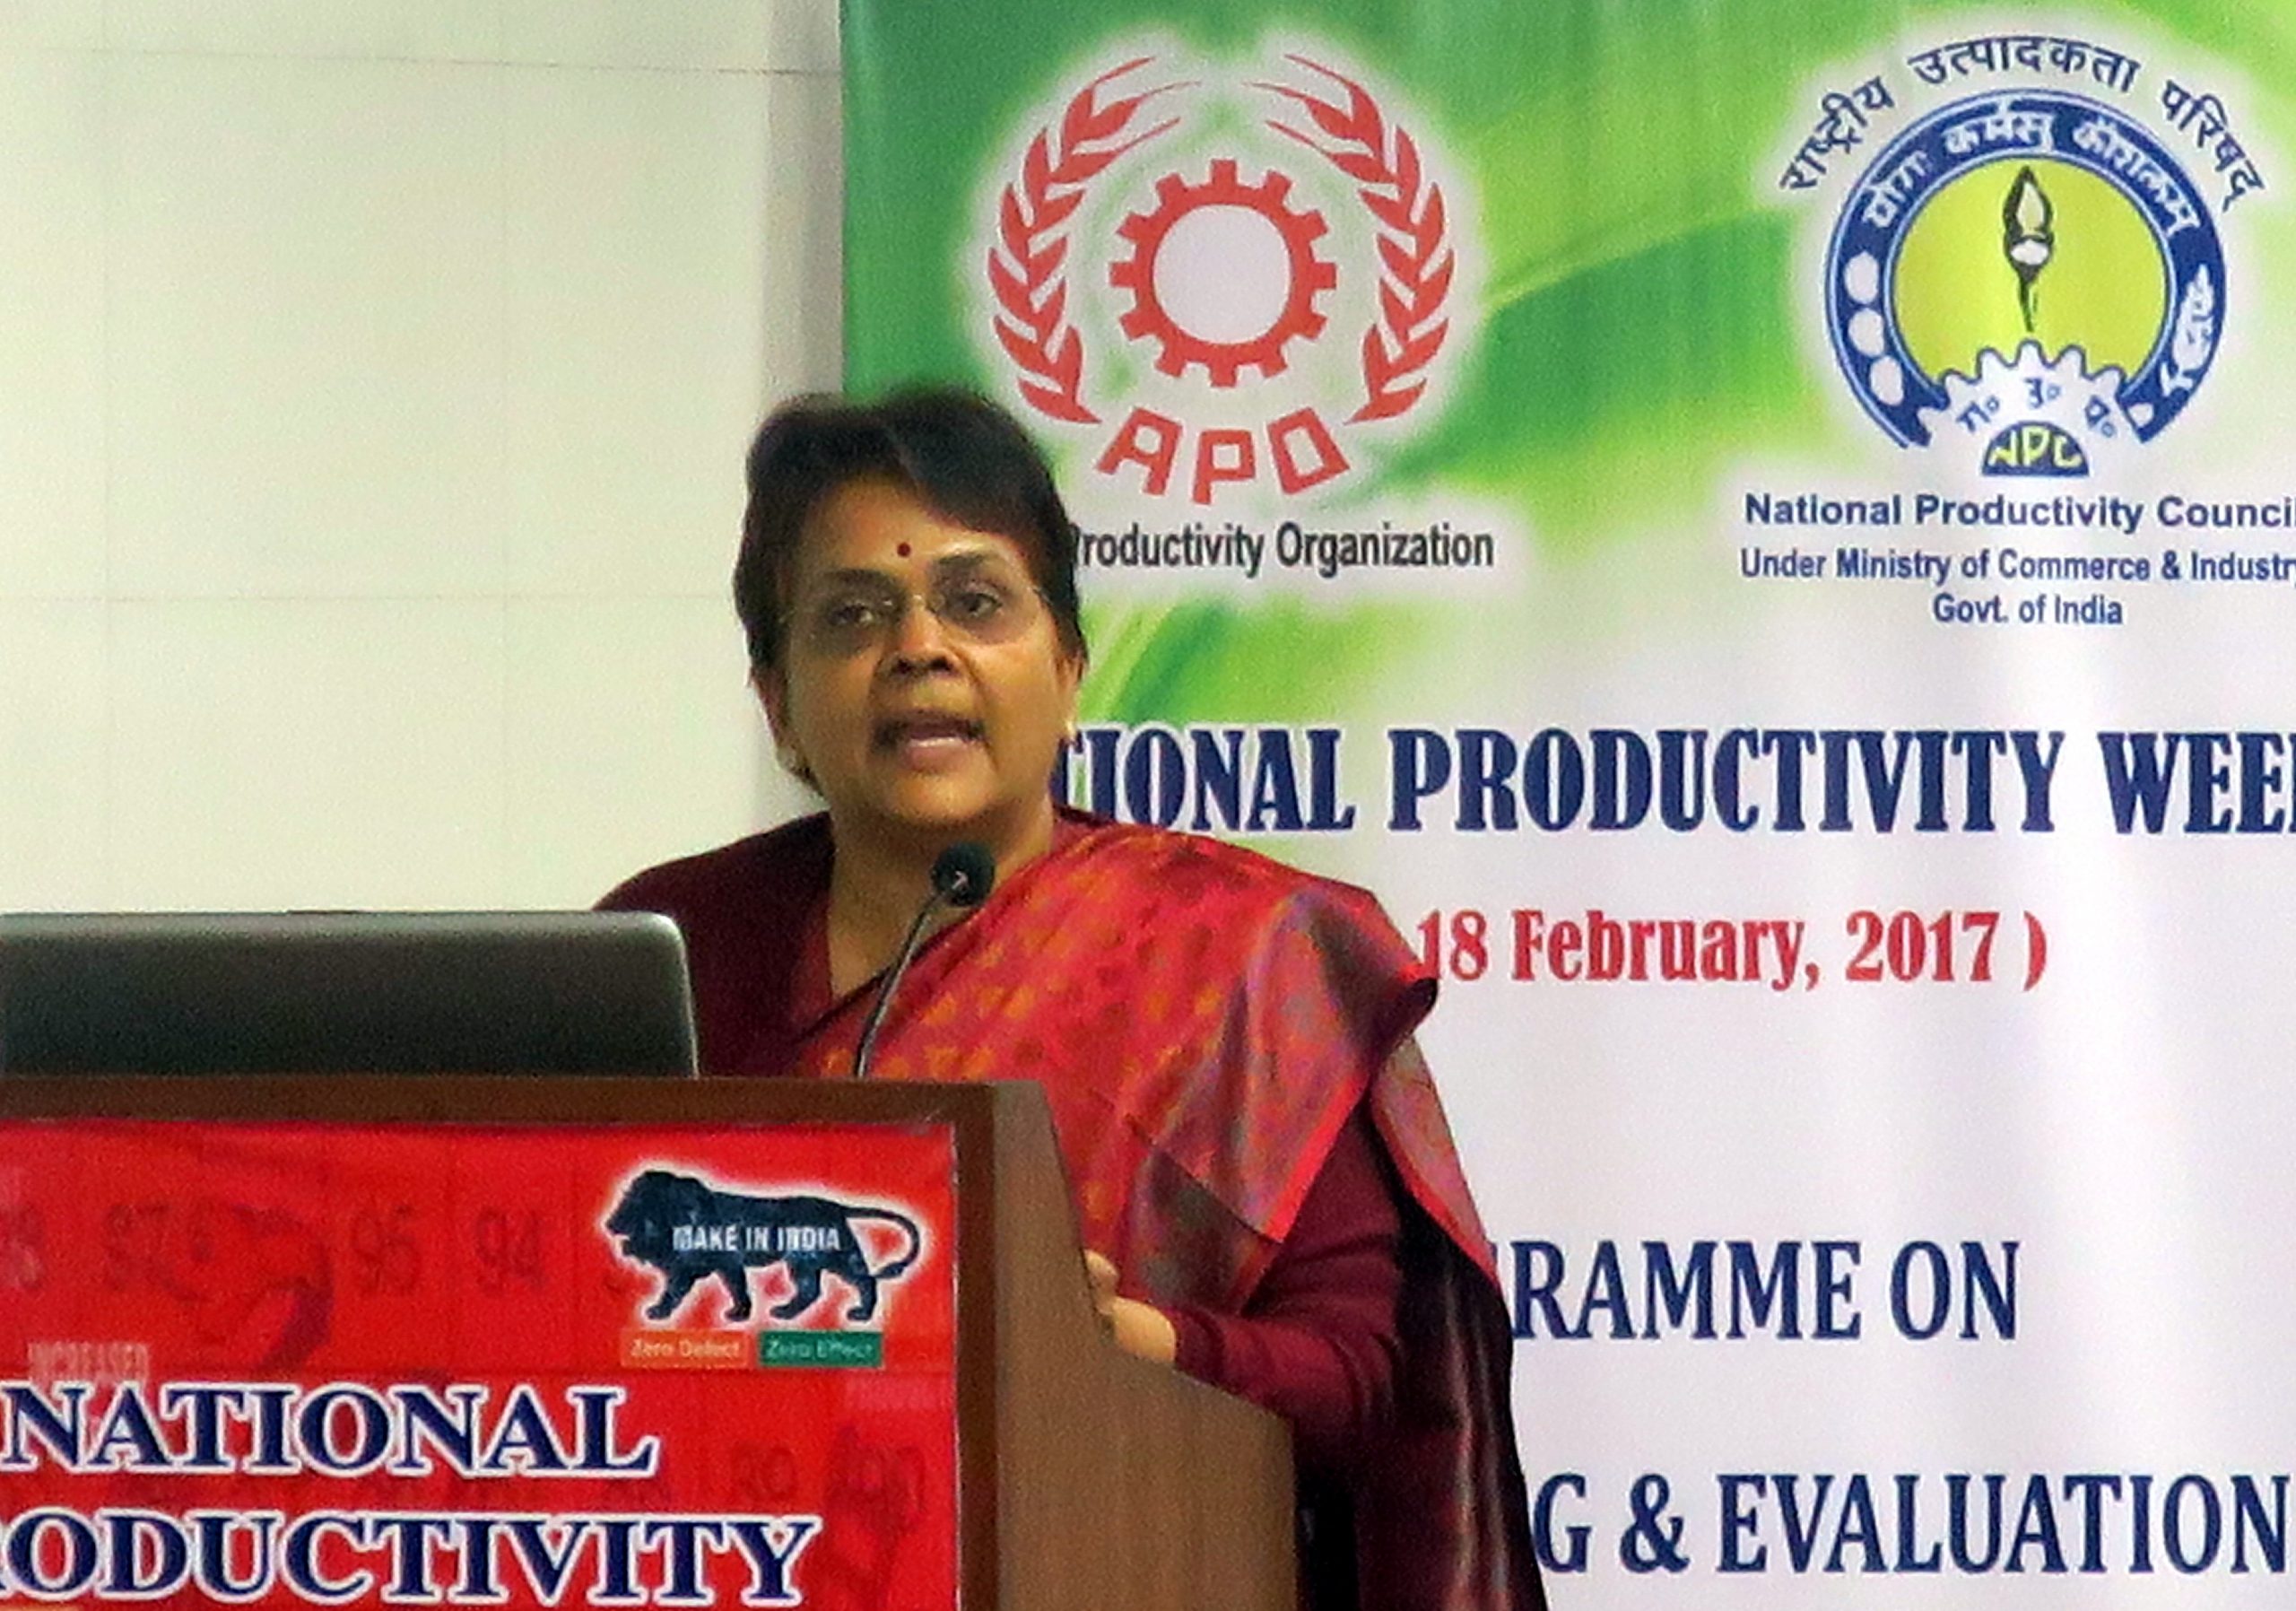 Kalpana Awasthi, Director General, NPC, delivering welcome remarks.